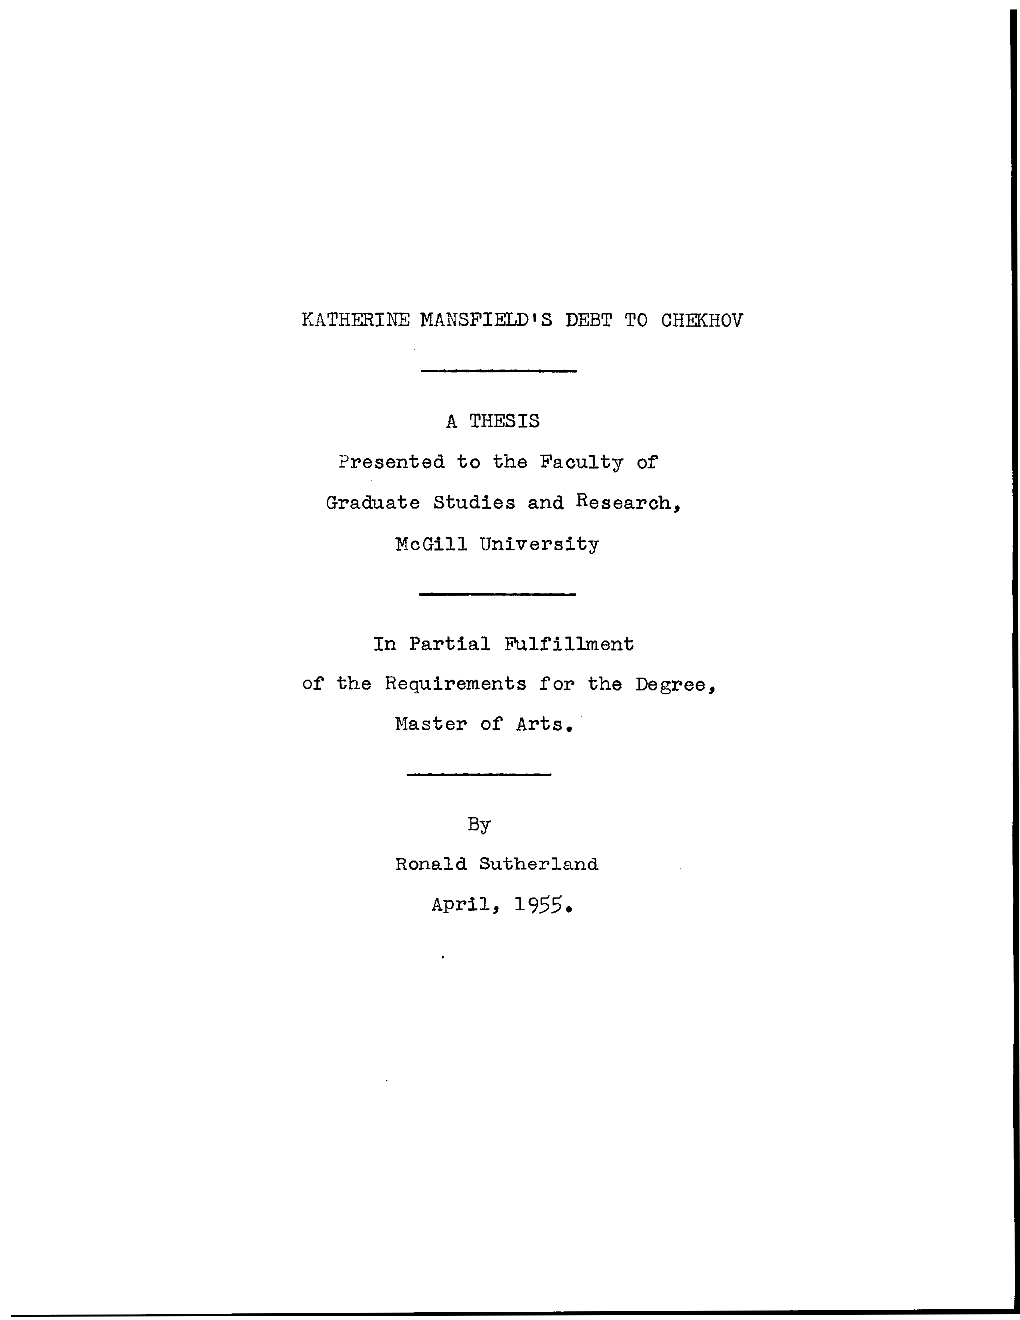 Katherlne MANSFIELD's DEBT to CHEKHOV a THESIS By